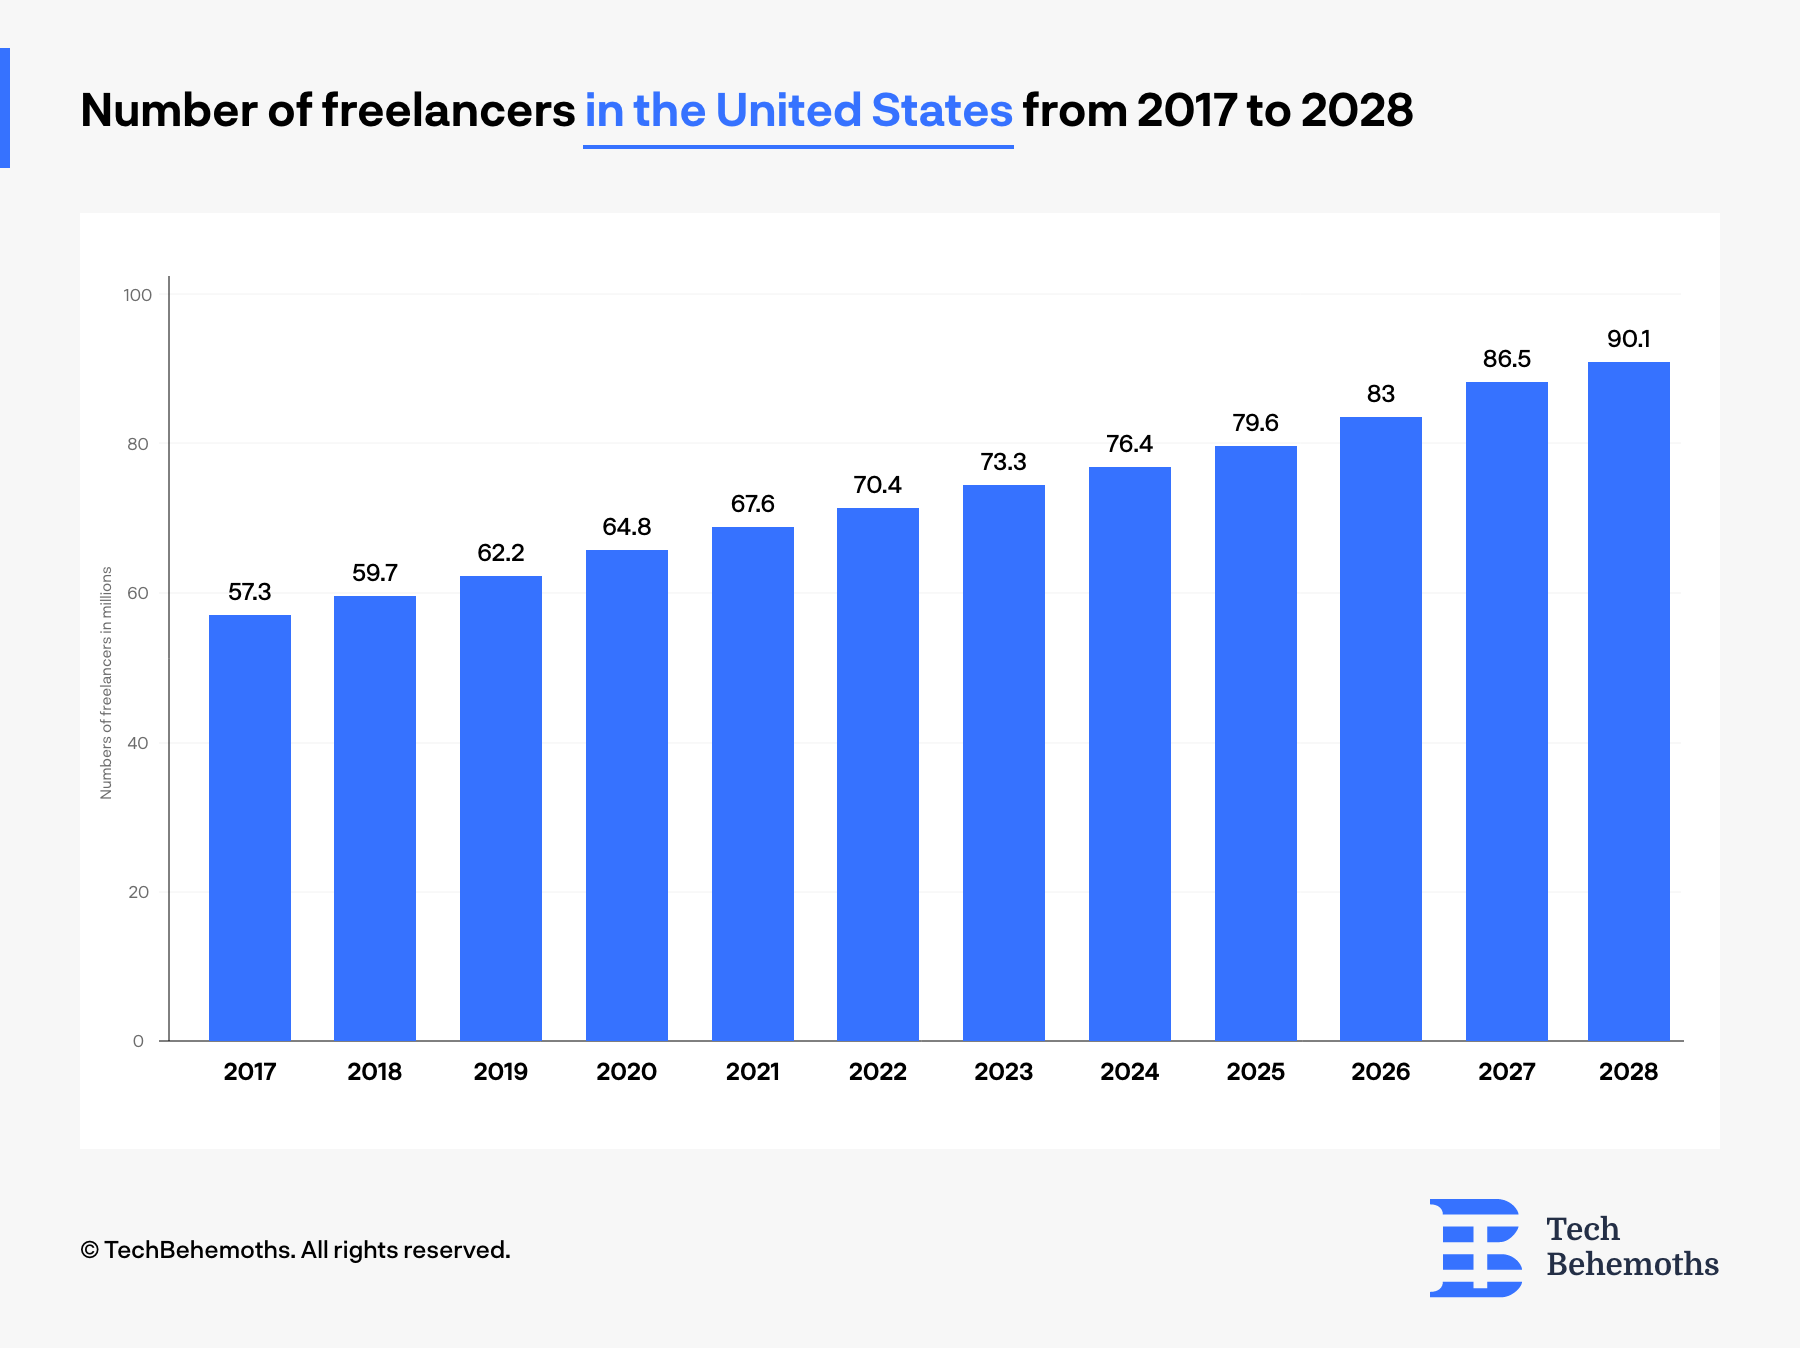 Number of freelancers in the United States from 2017 to 2028